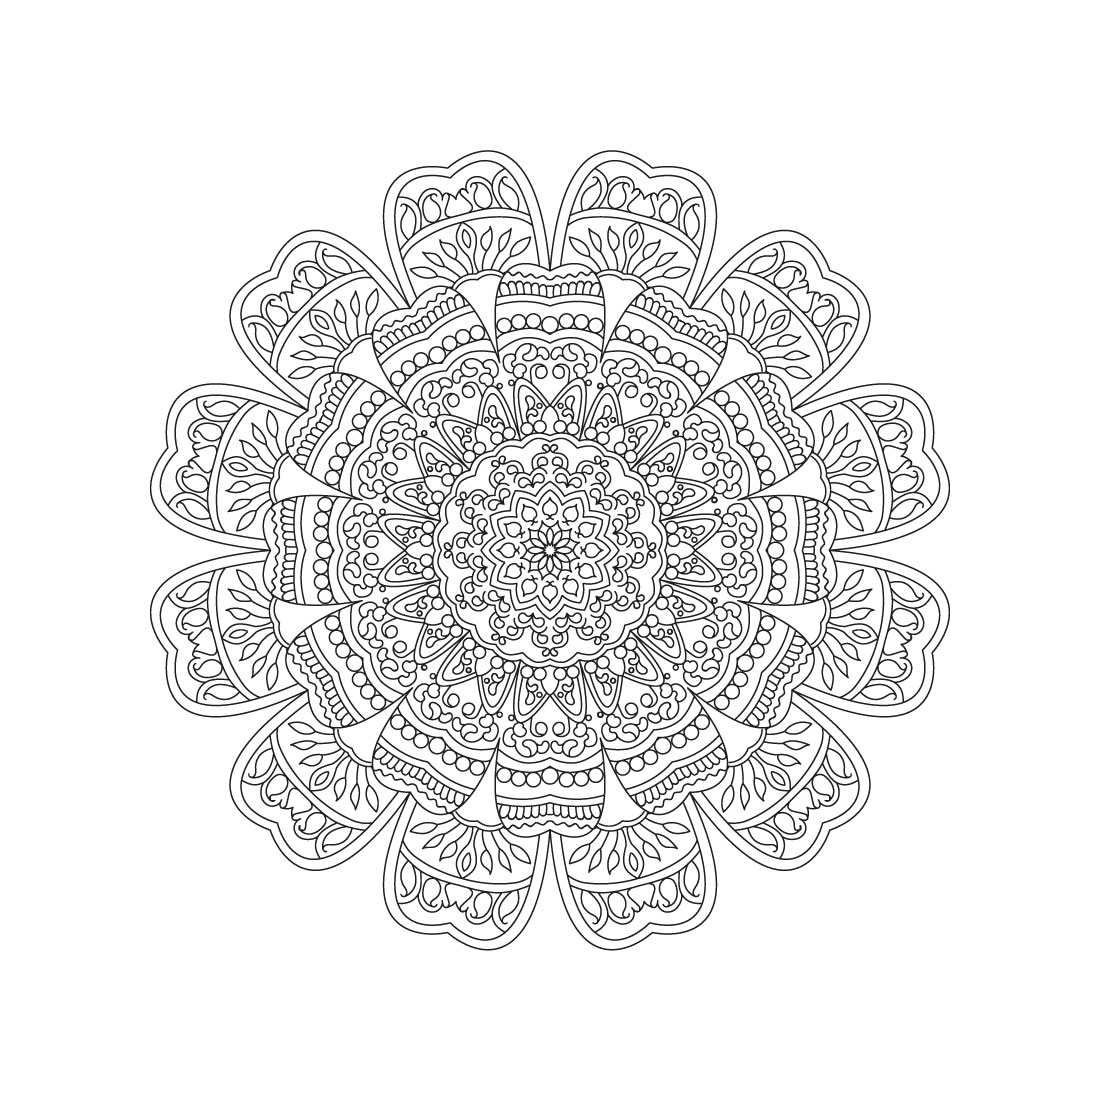 bundle of 10 tranquility mandala coloring book pages 06 364